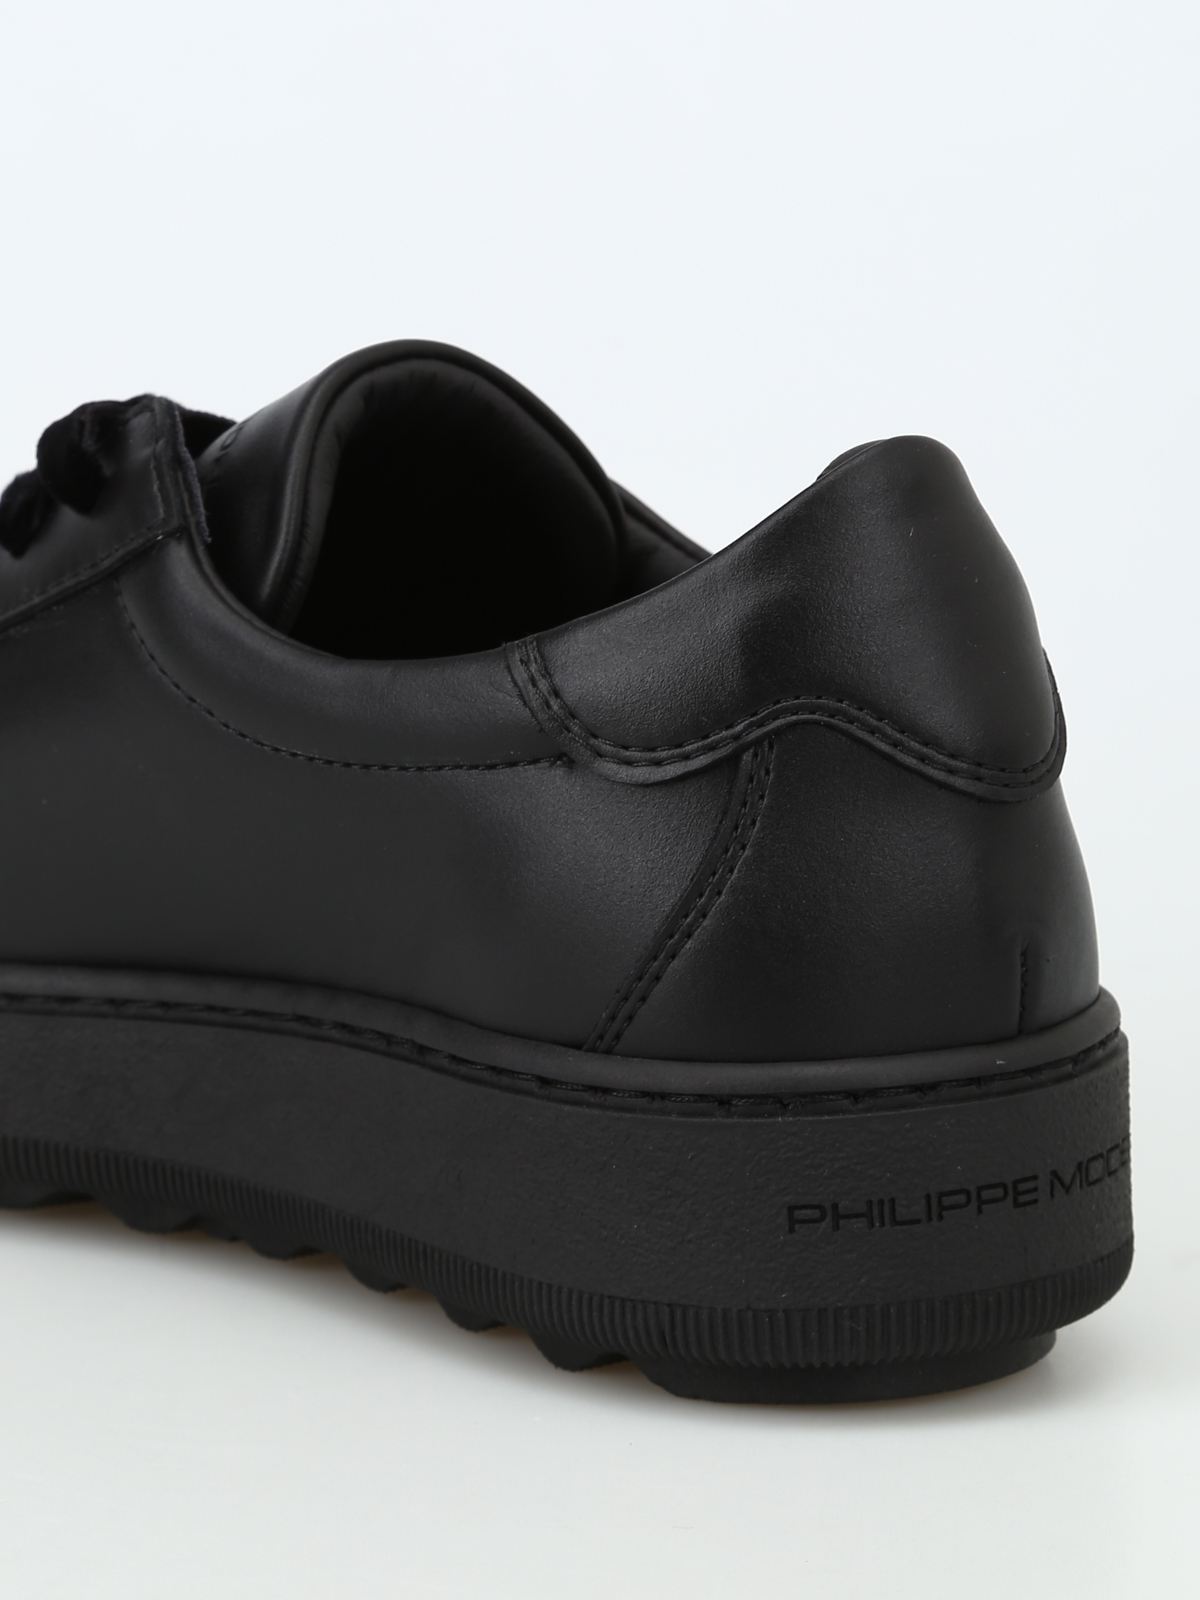 Trainers Philippe Model - Madeleine black leather low top sneakers